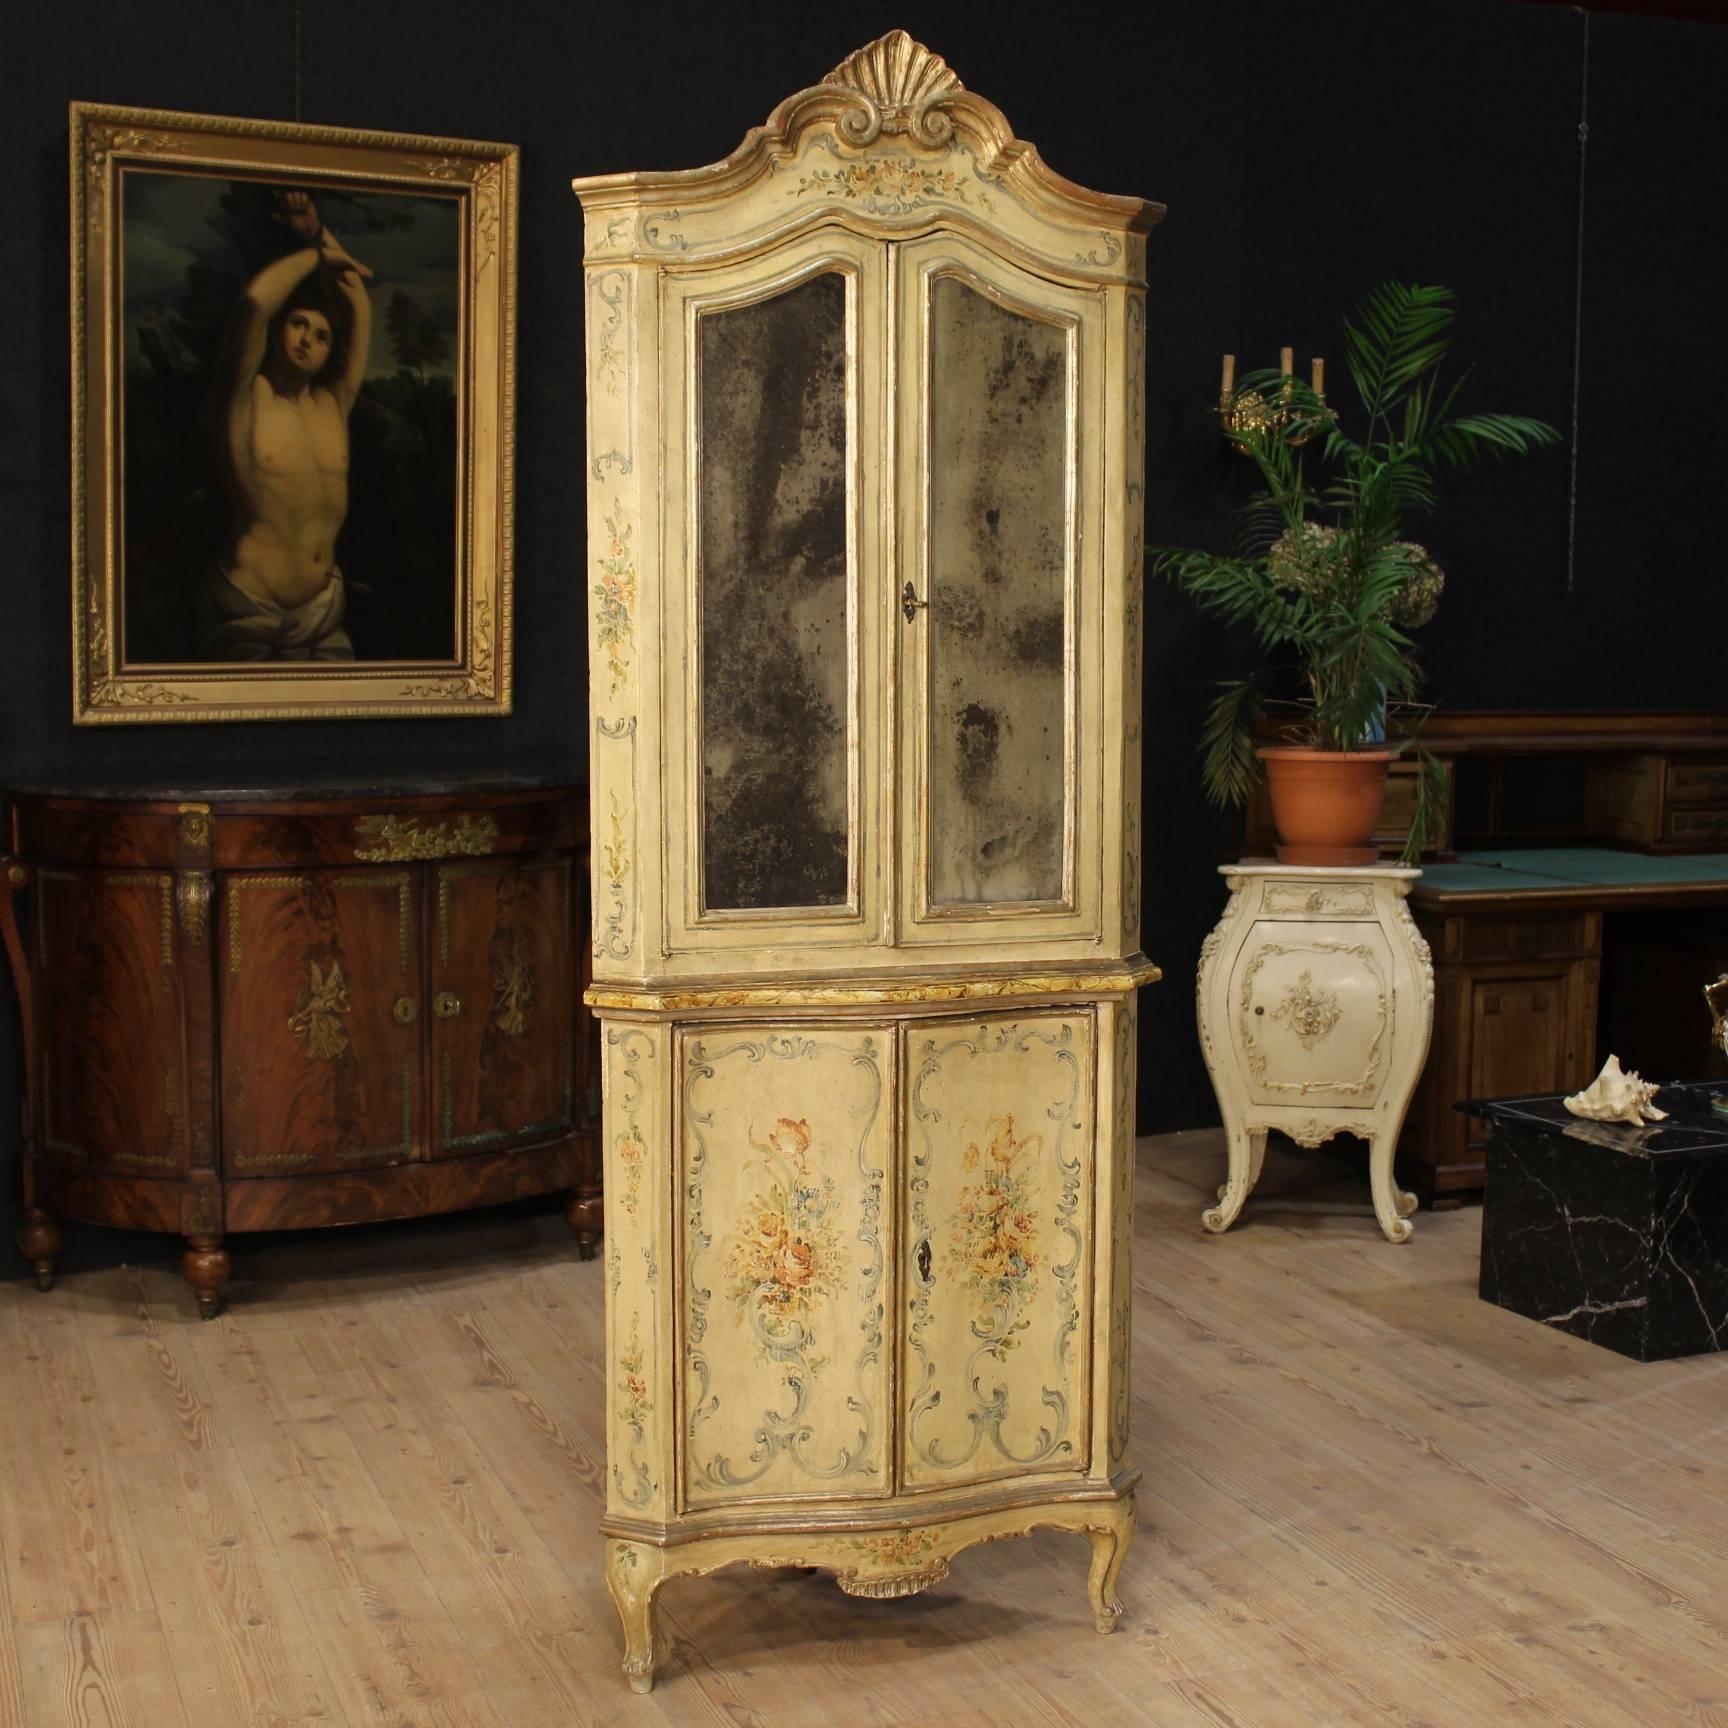 Antique Venetian corner cupboard of the 19th century. Double body furniture finely carved, lacquered and hand painted with floral decorations. It presents original mercury mirrors and a working key for both doors. Interior of the corner cupboard